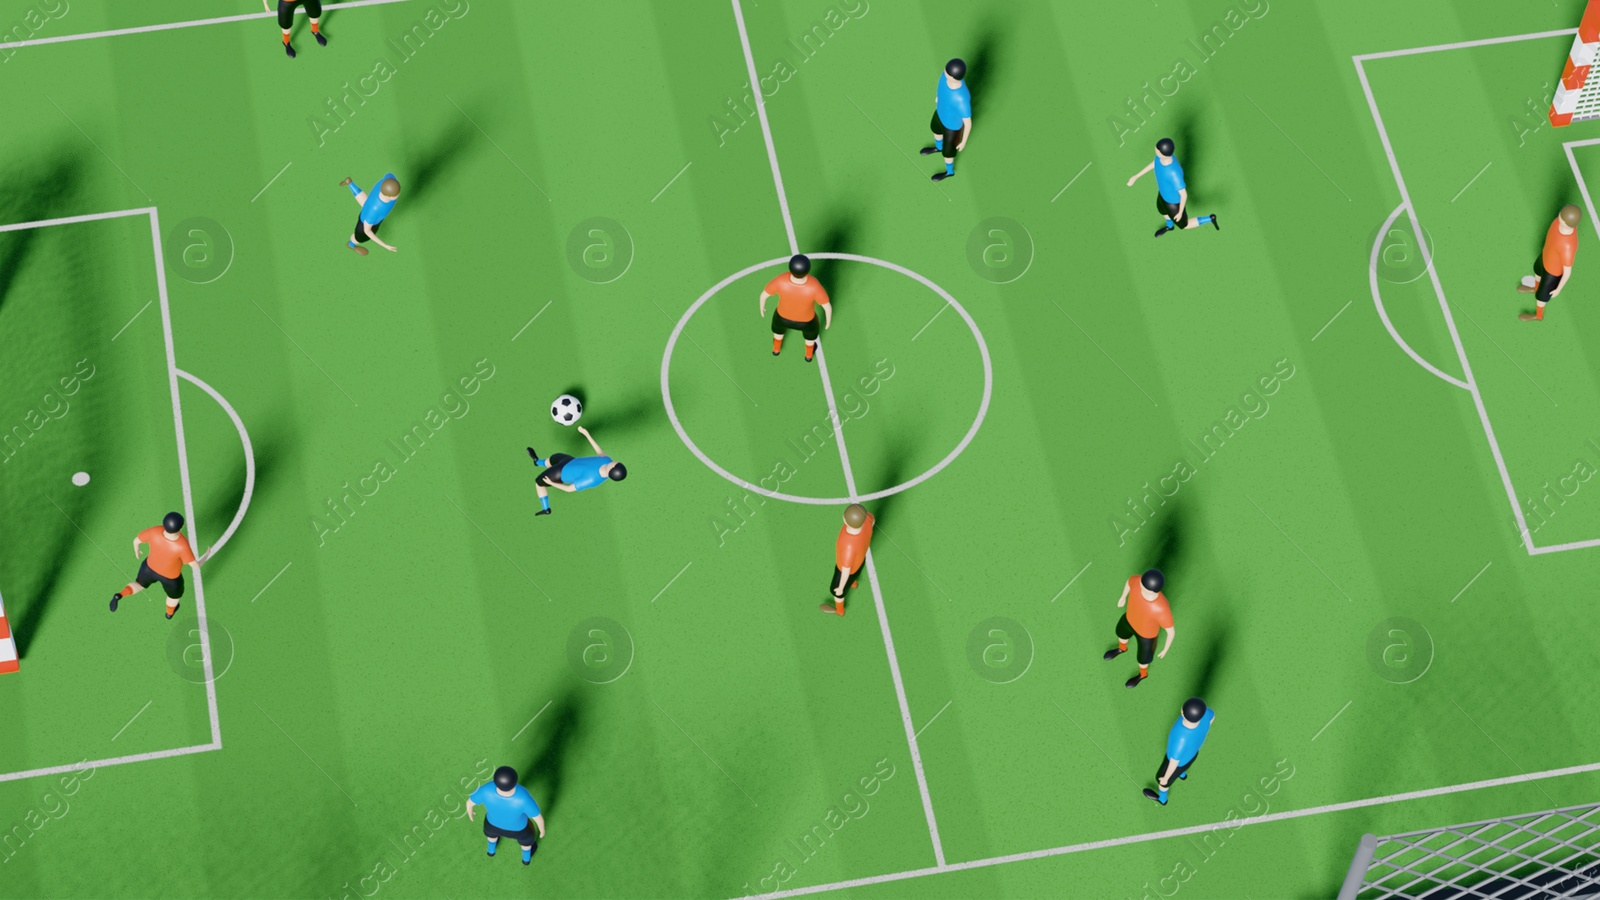 Illustration of Sports video game, illustration. Football players on field, above view